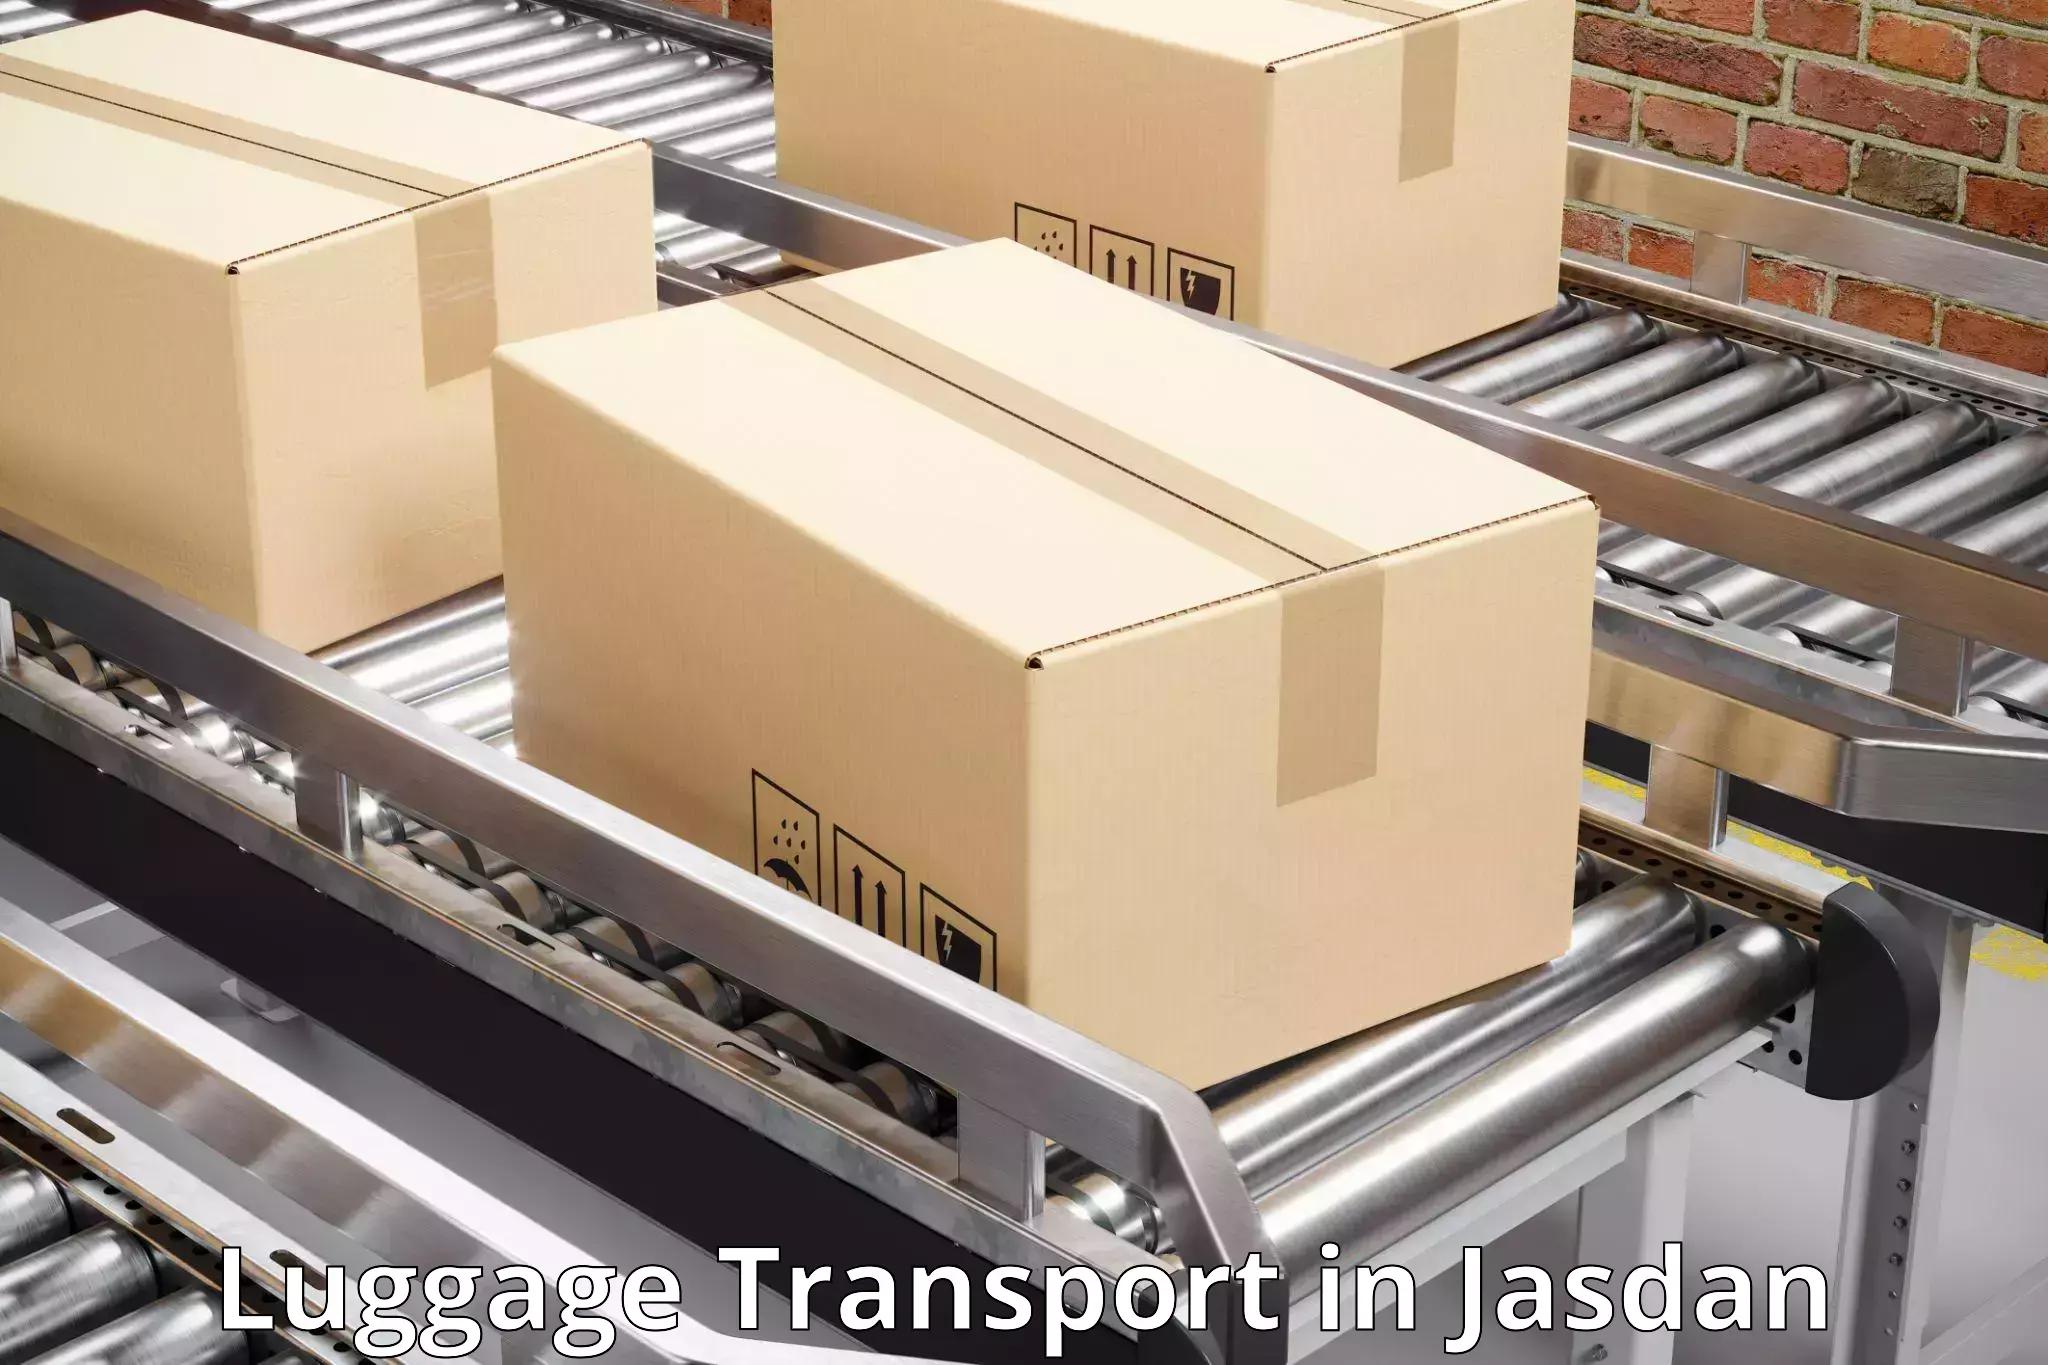 Online luggage shipping in Jasdan